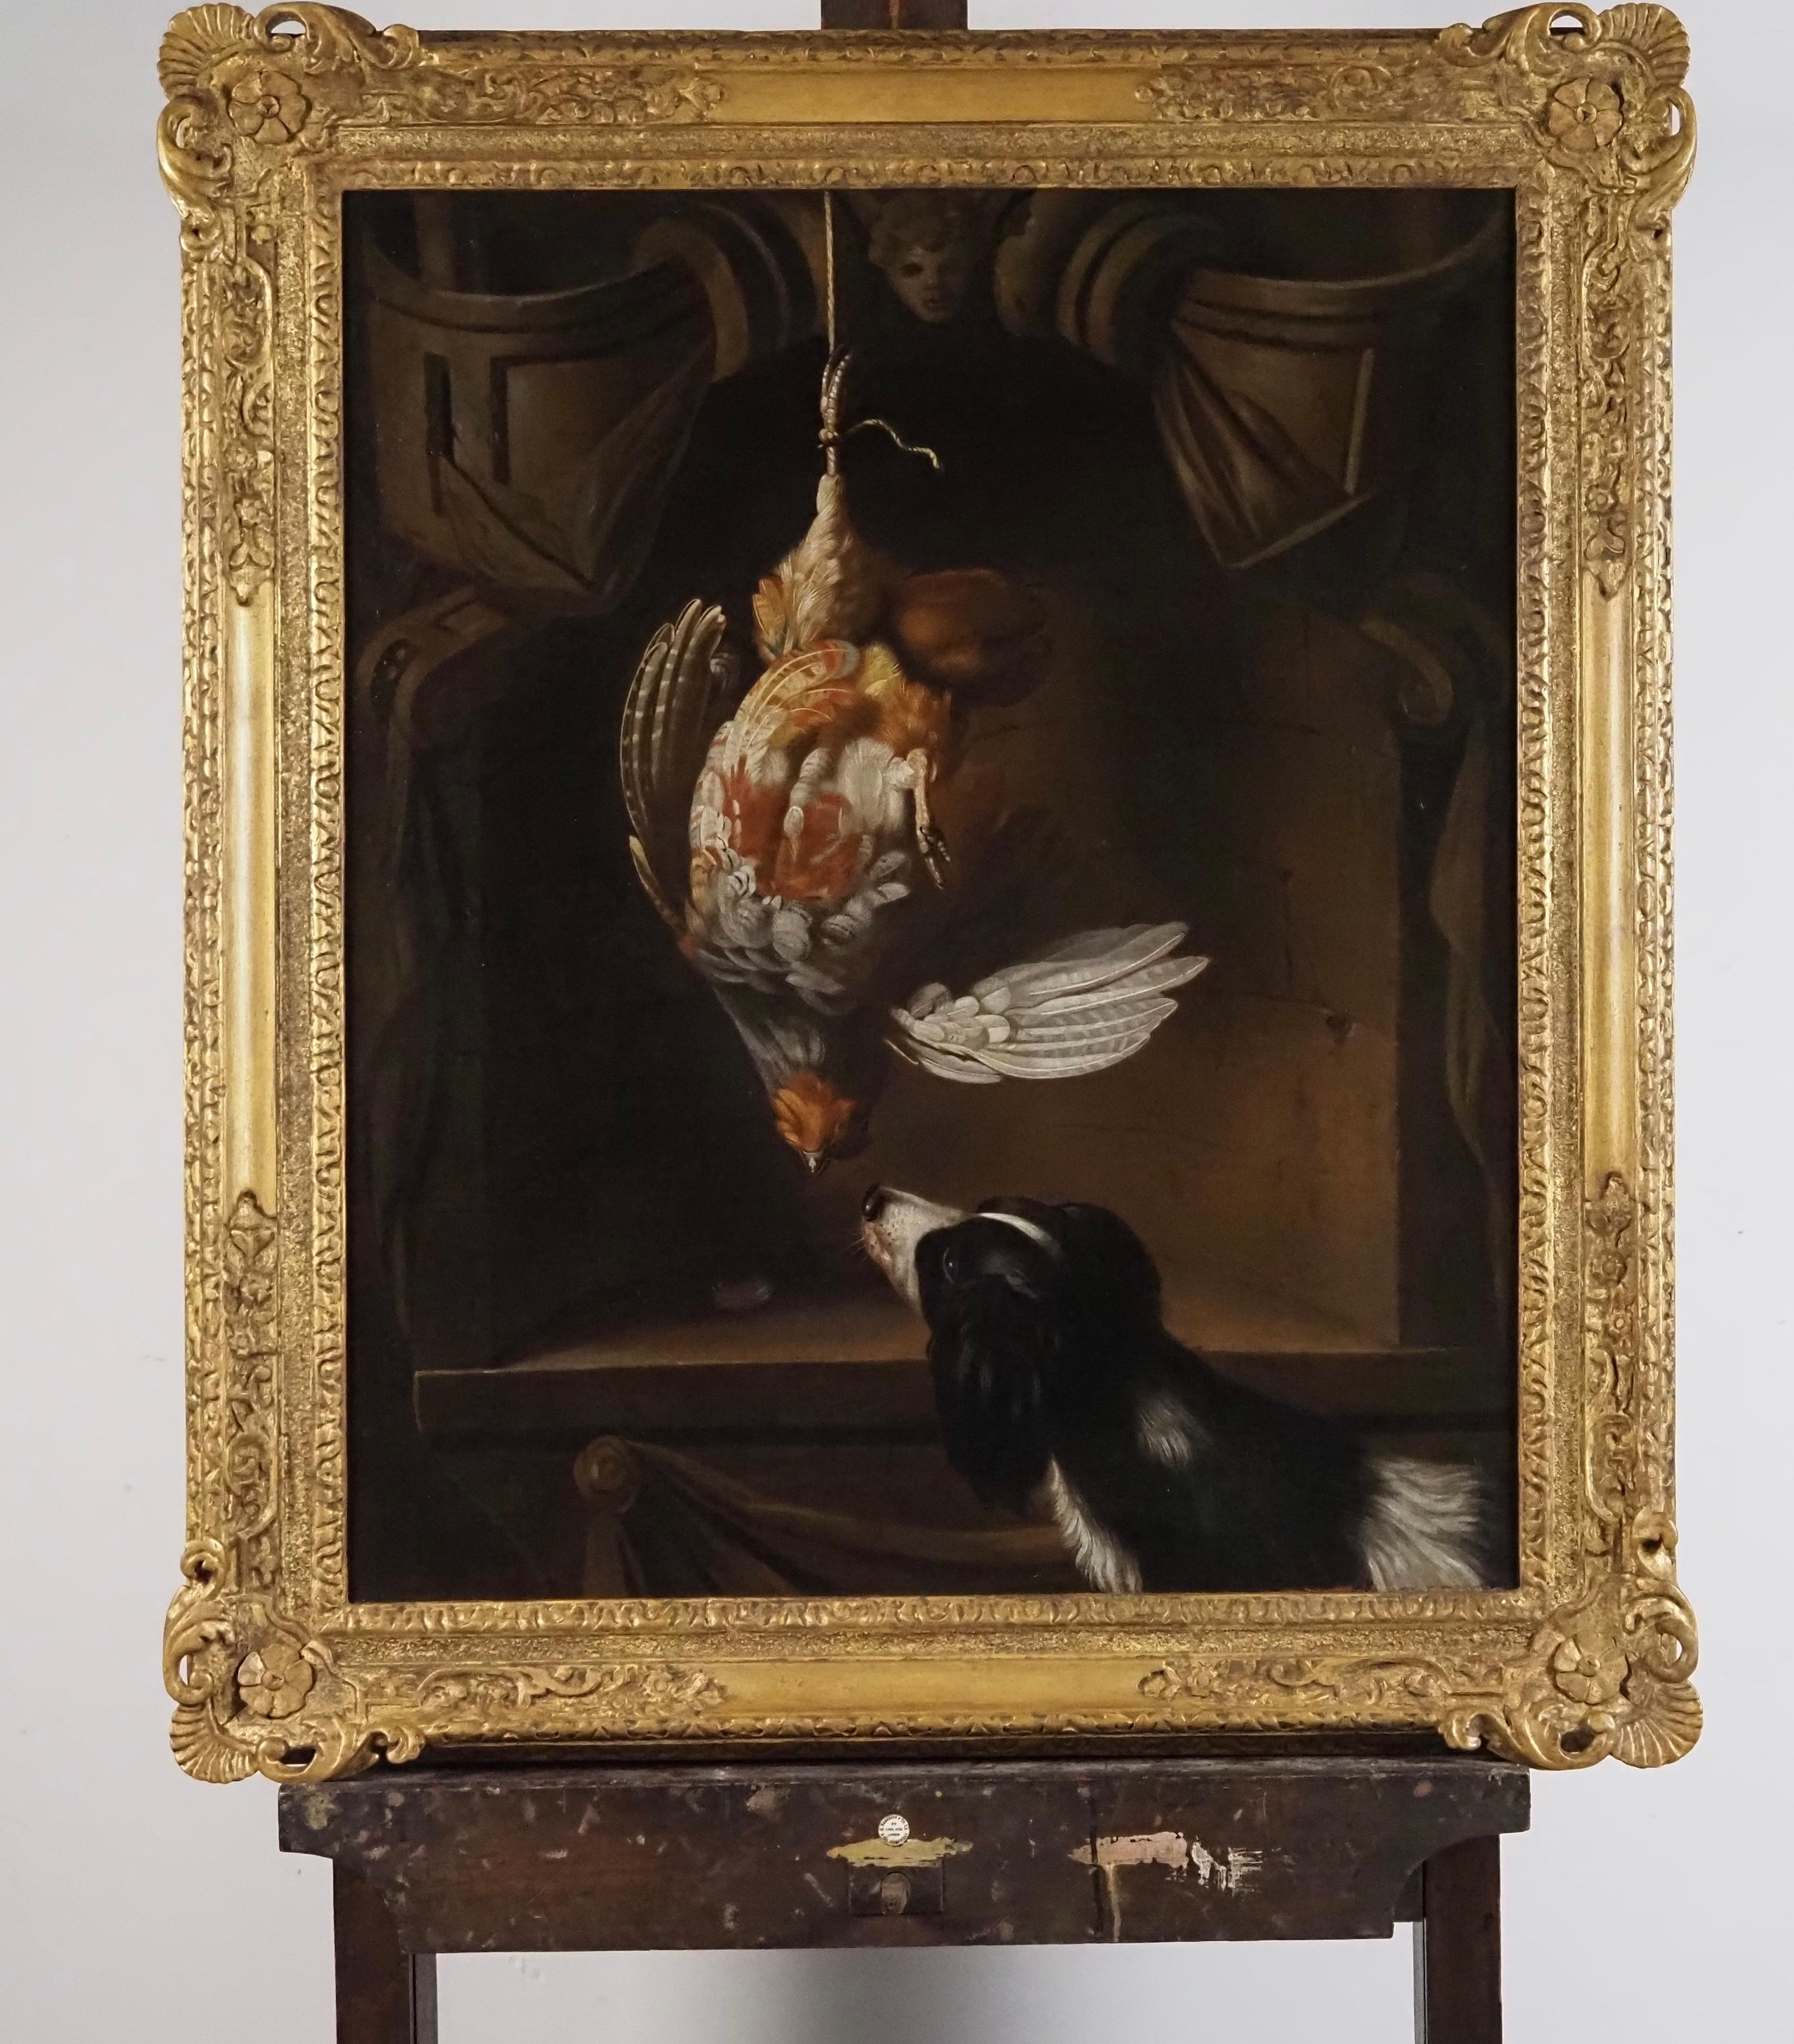 A hanging Partridge in a sculpted cartouche, a spaniel below - Old Masters Painting by Unknown